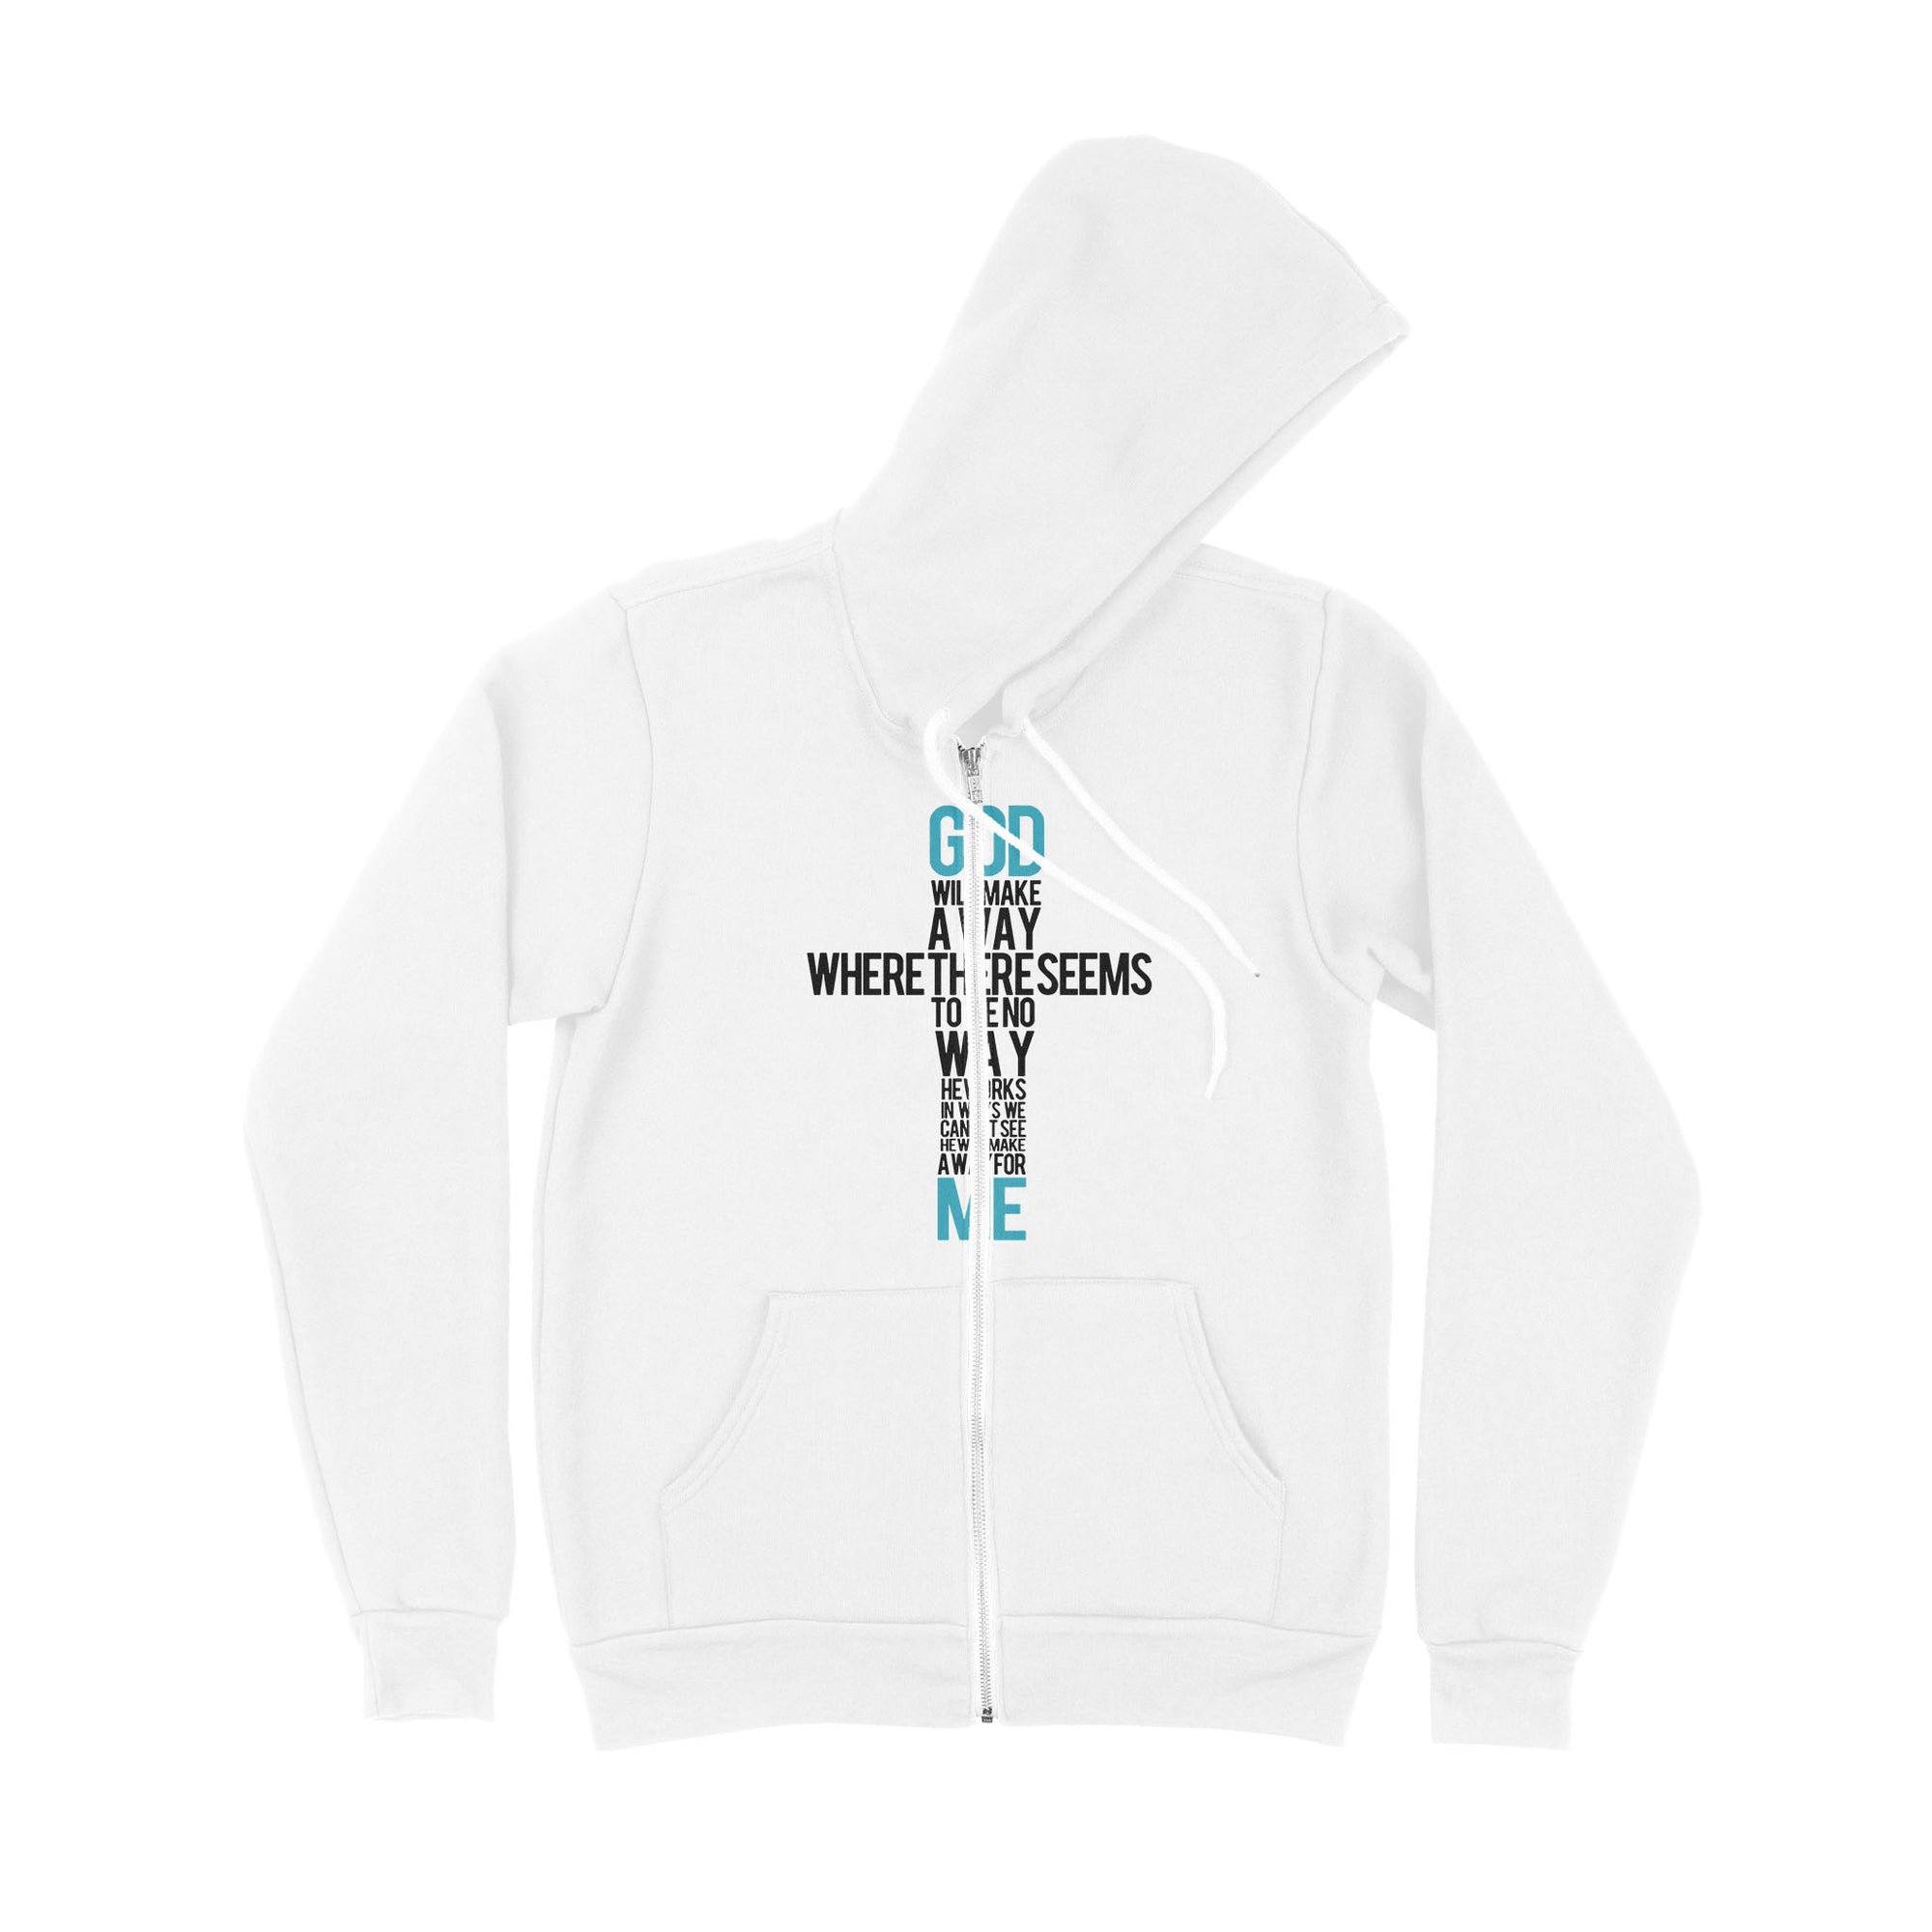 God Will Make A Way When It Seems There Is No Way - Premium Zip Hoodie